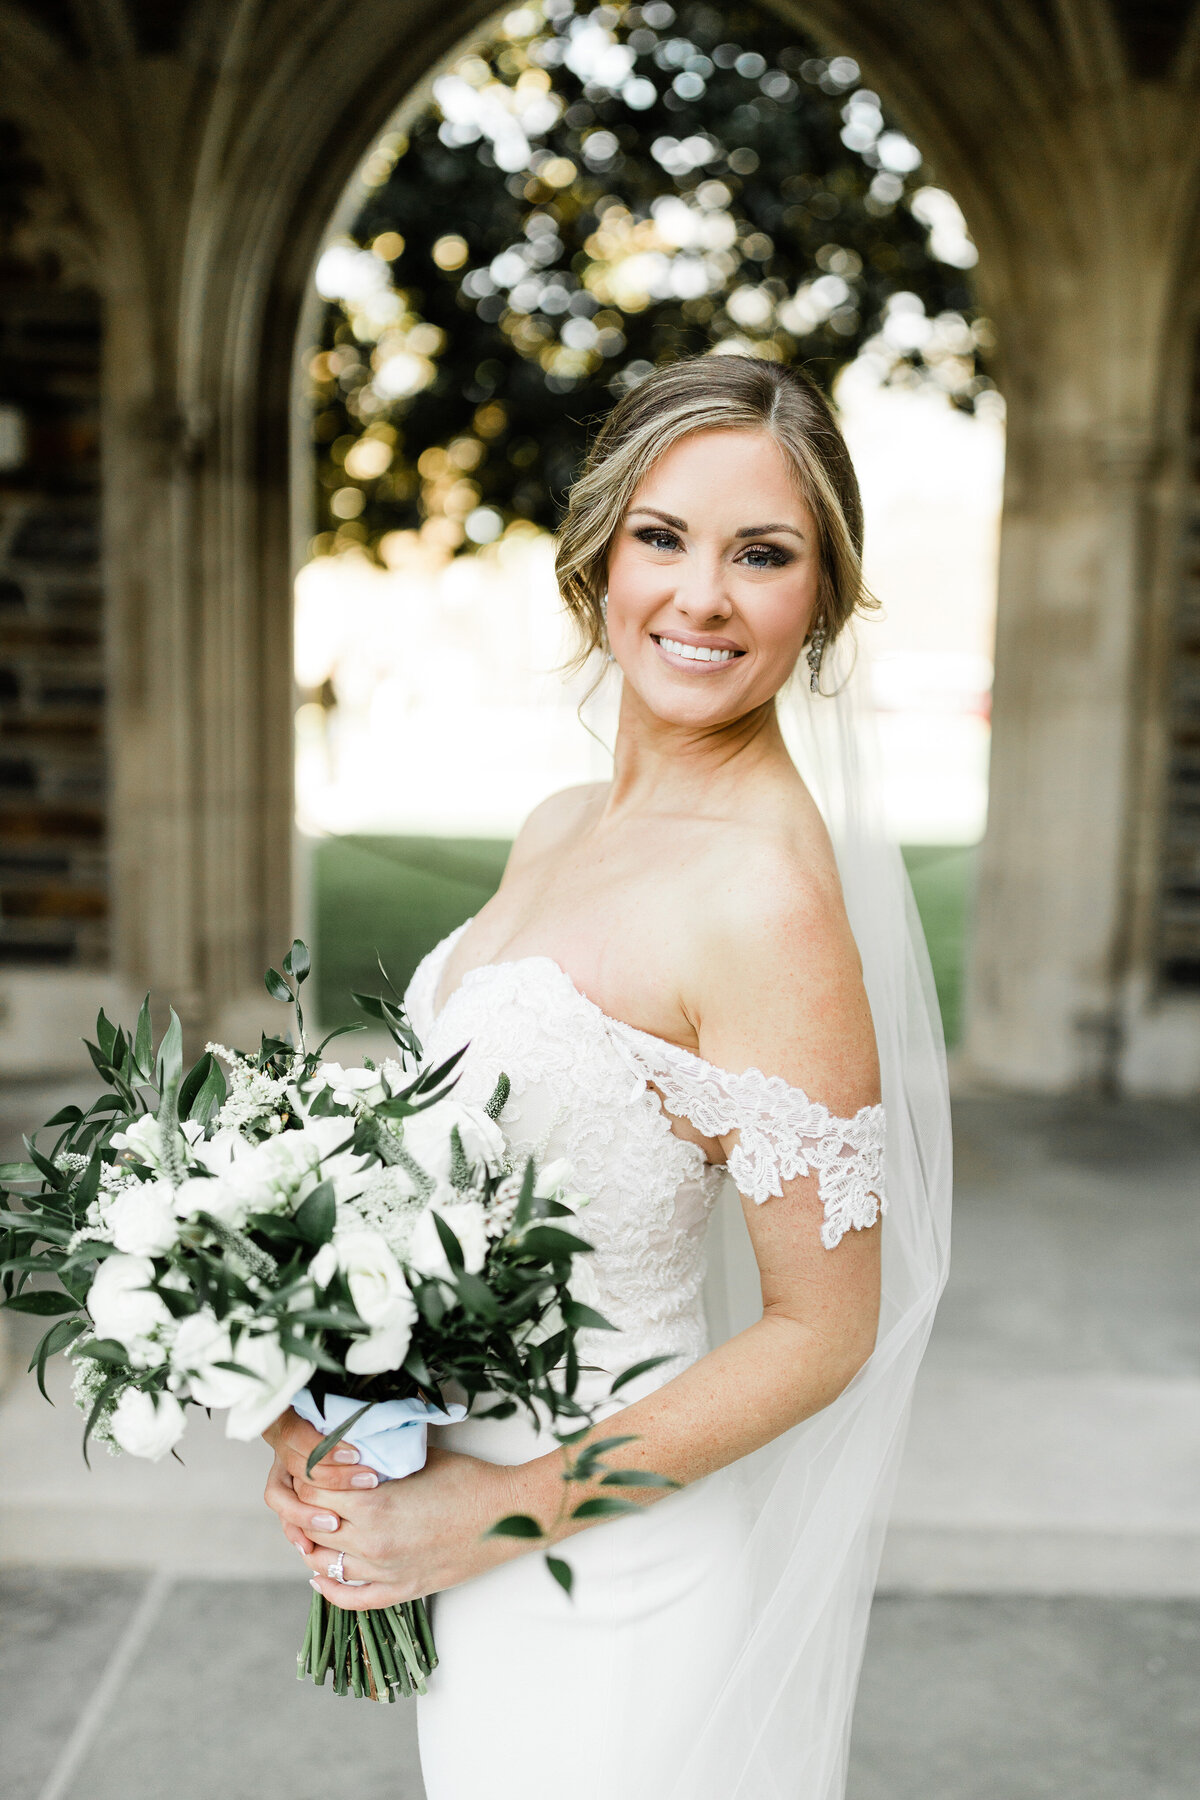 Stunning bridal formal photos with stone arches in the background make this one of our favorite photos.